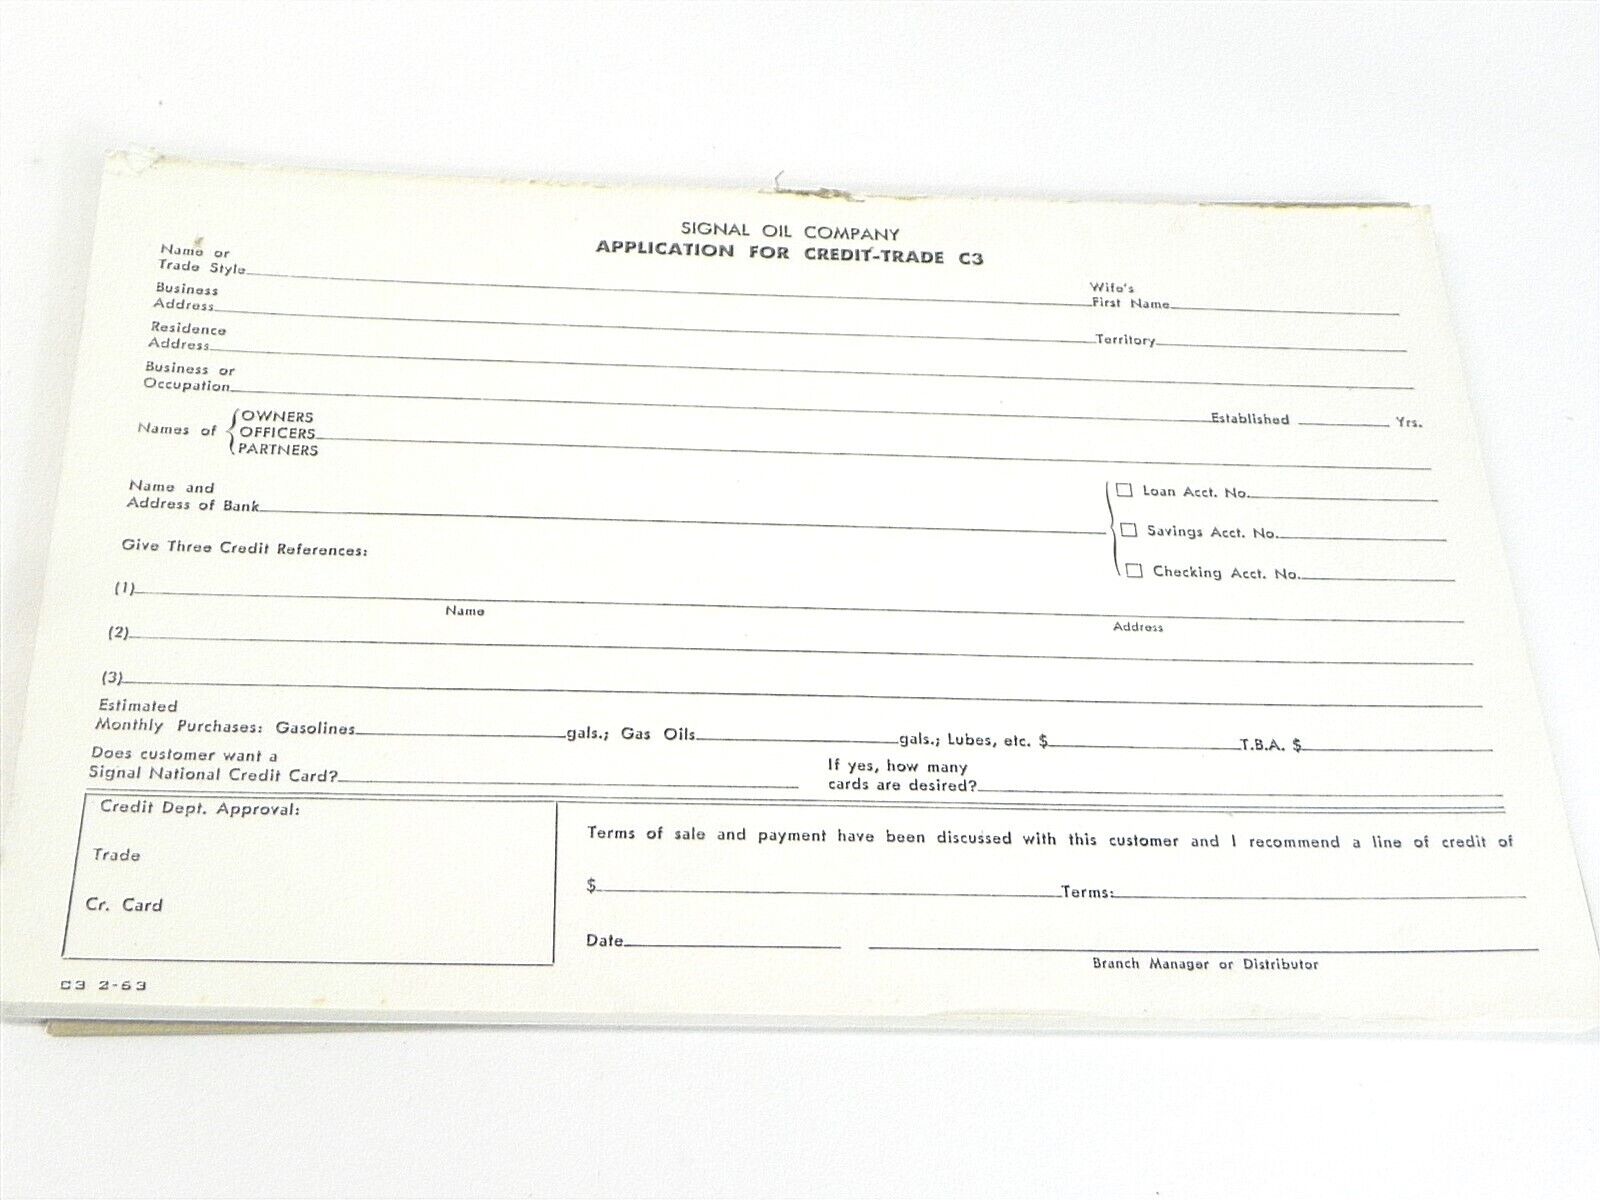 Vintage 1963 Signal Oil Company Application For Credit-Trade #C3 50 Sheets 